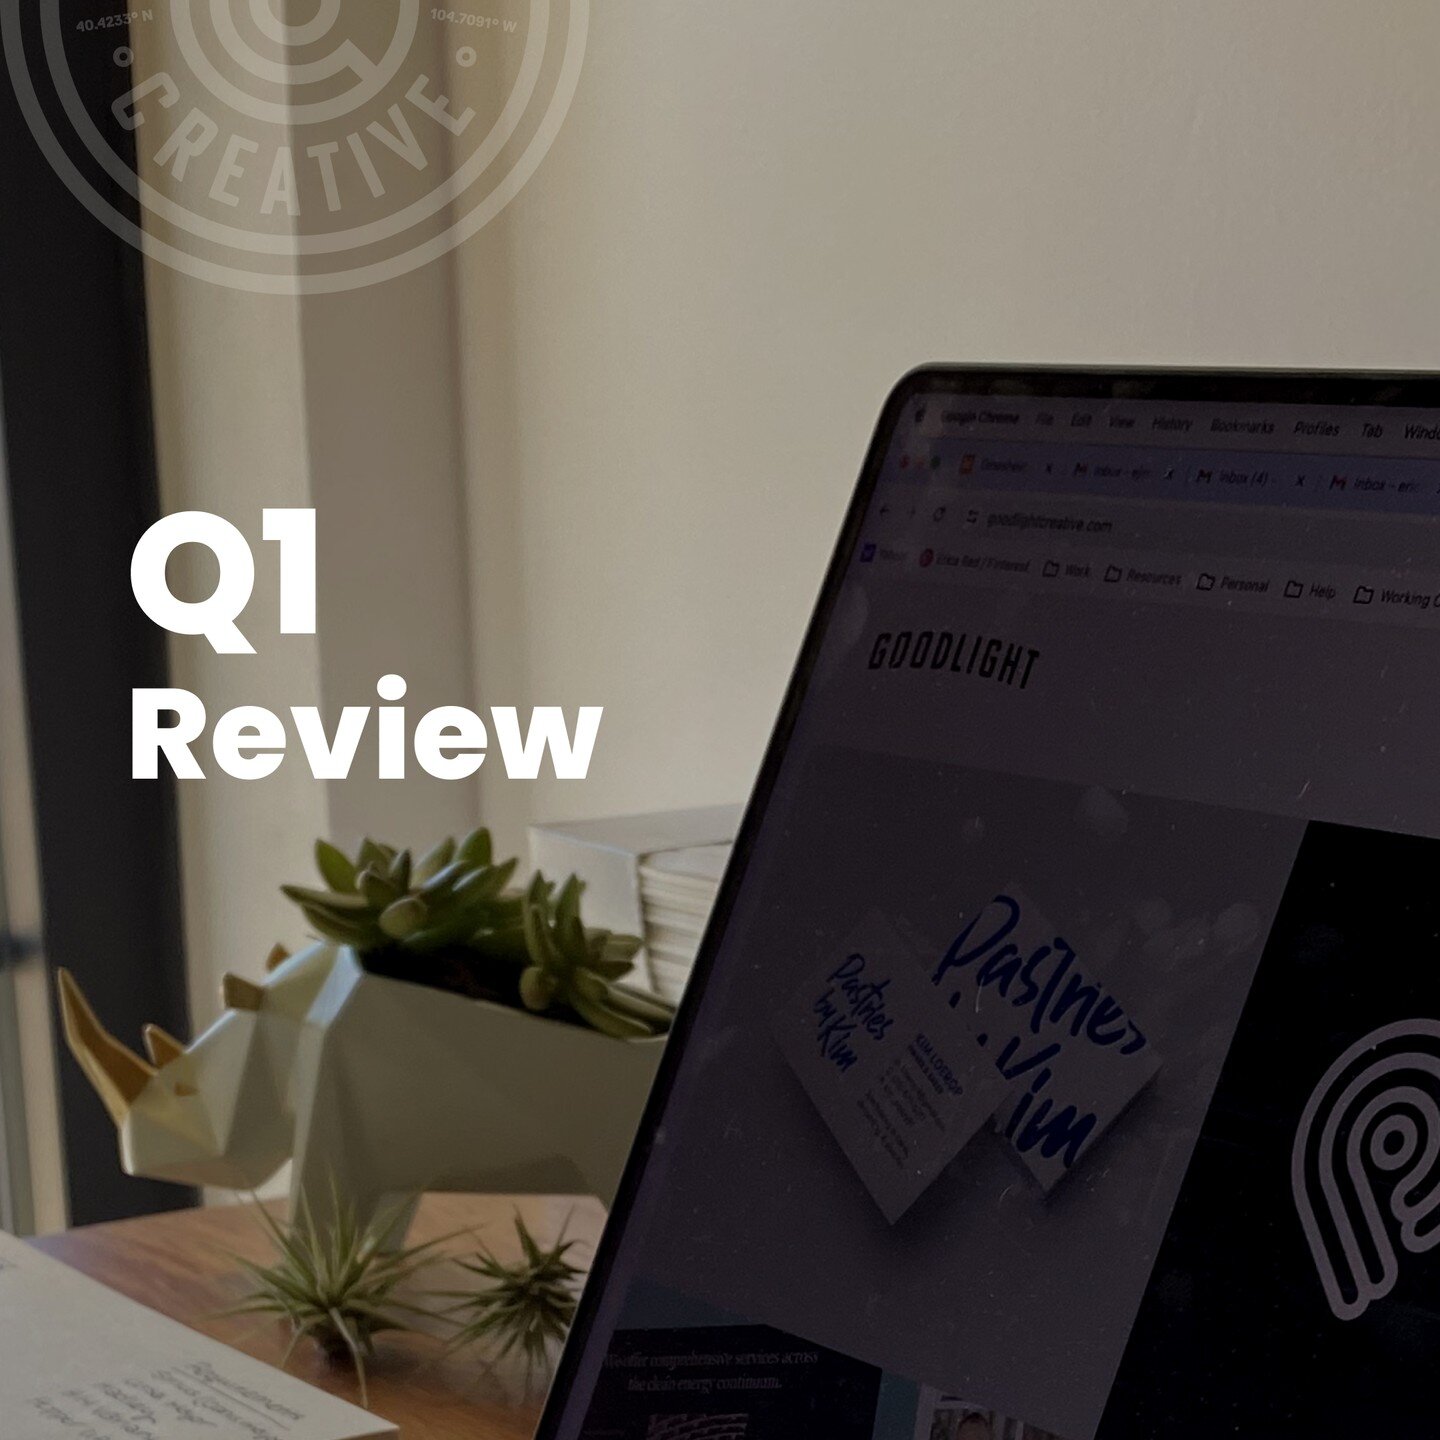 Reflecting on Q1 accomplishments at Goodlight! 🎉 From redesigning websites to launching an app, we've been on fire! 

Here's a quick rundown of what we achieved for our clients:
&mdash; Redesigned and Launched 1 Website 
&mdash; Produced 1 Annual Re